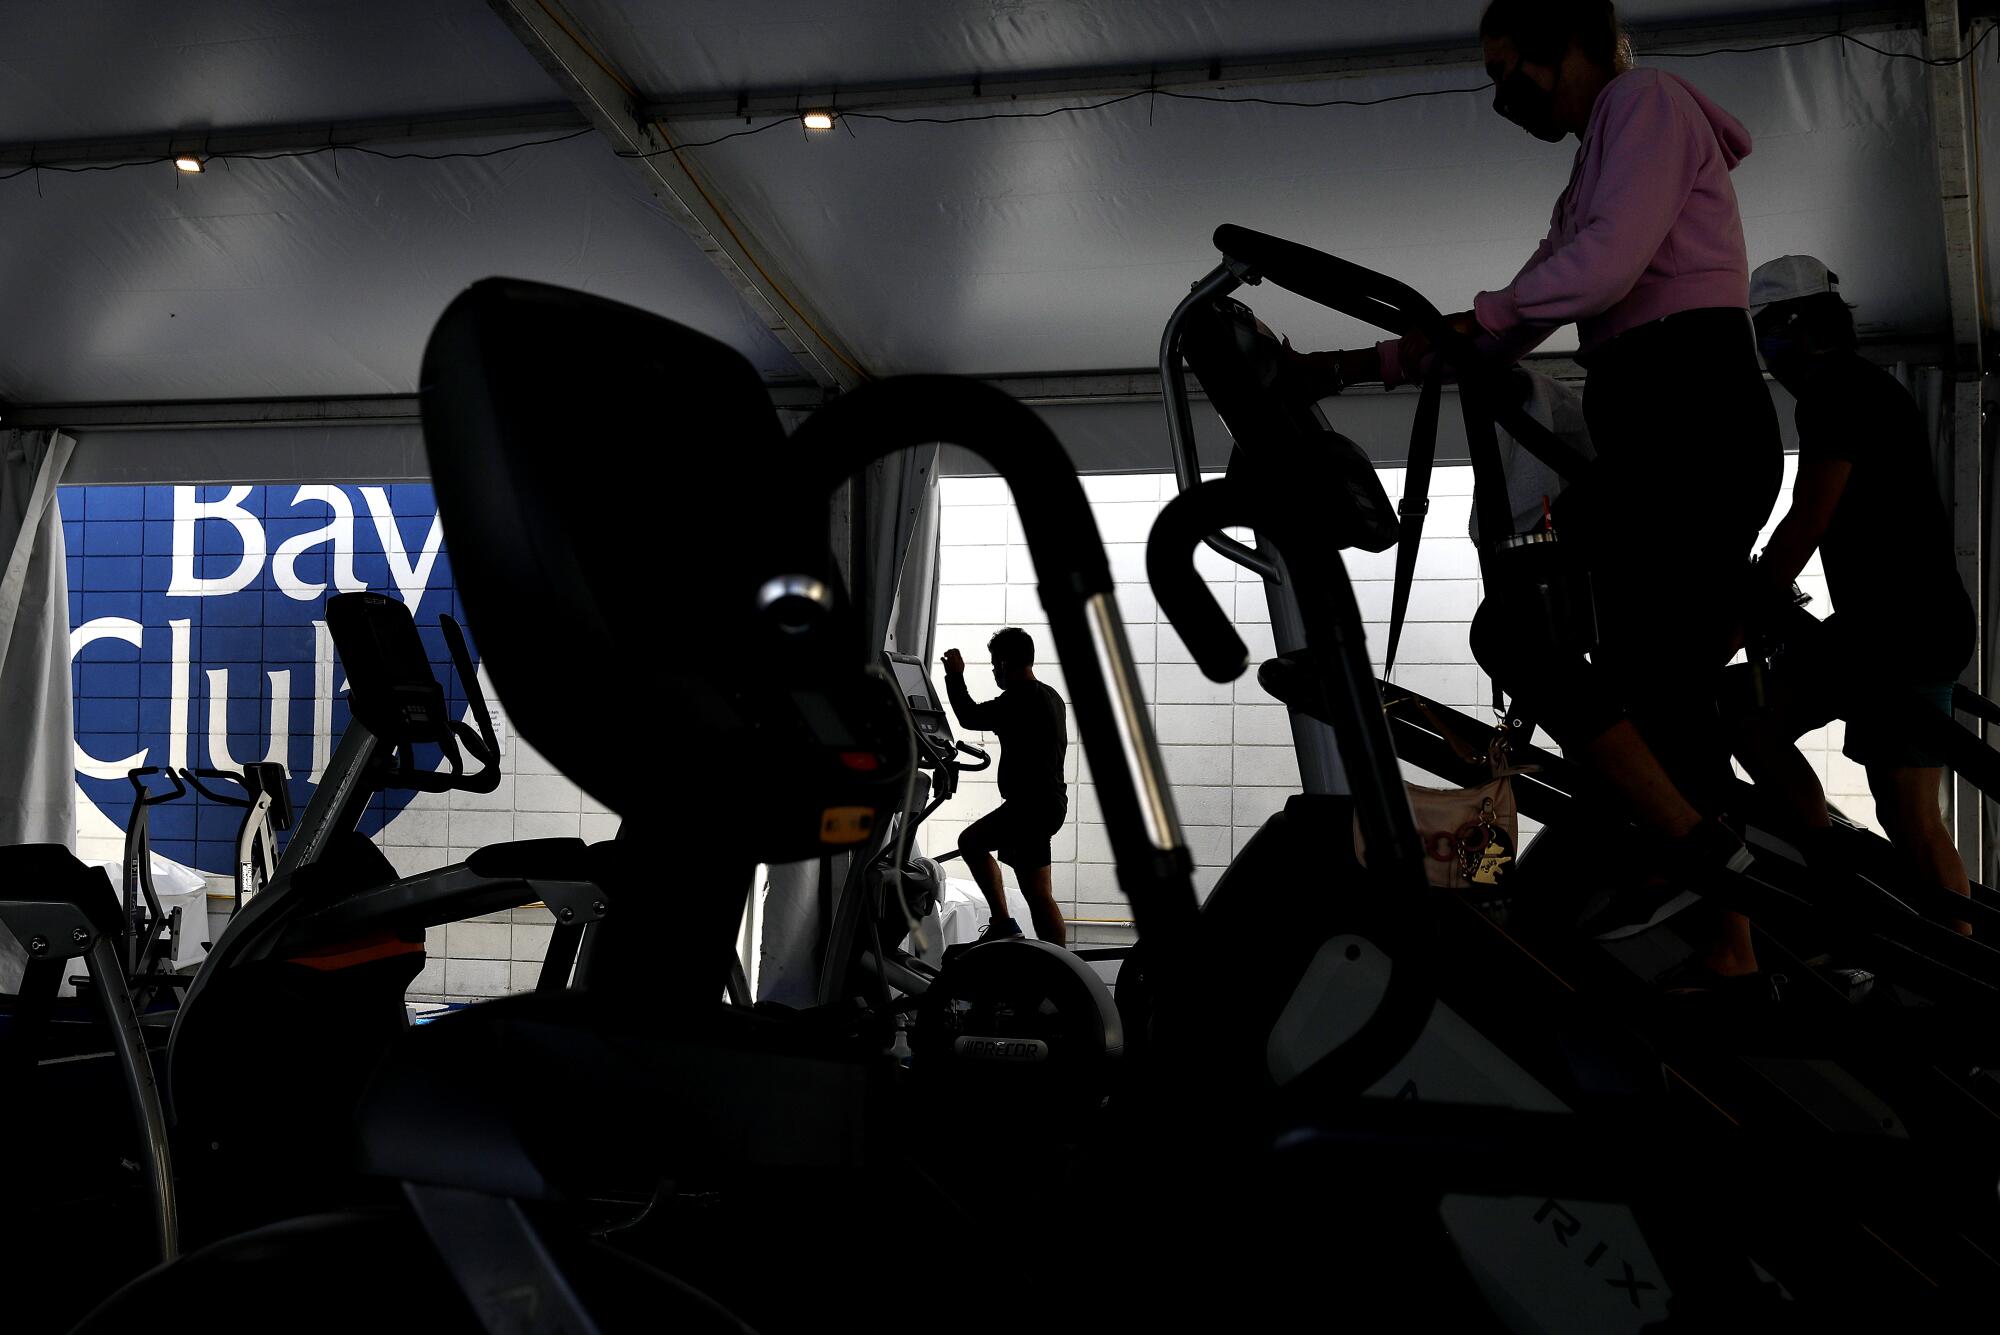 People are seen in silhouette on stairclimbers.